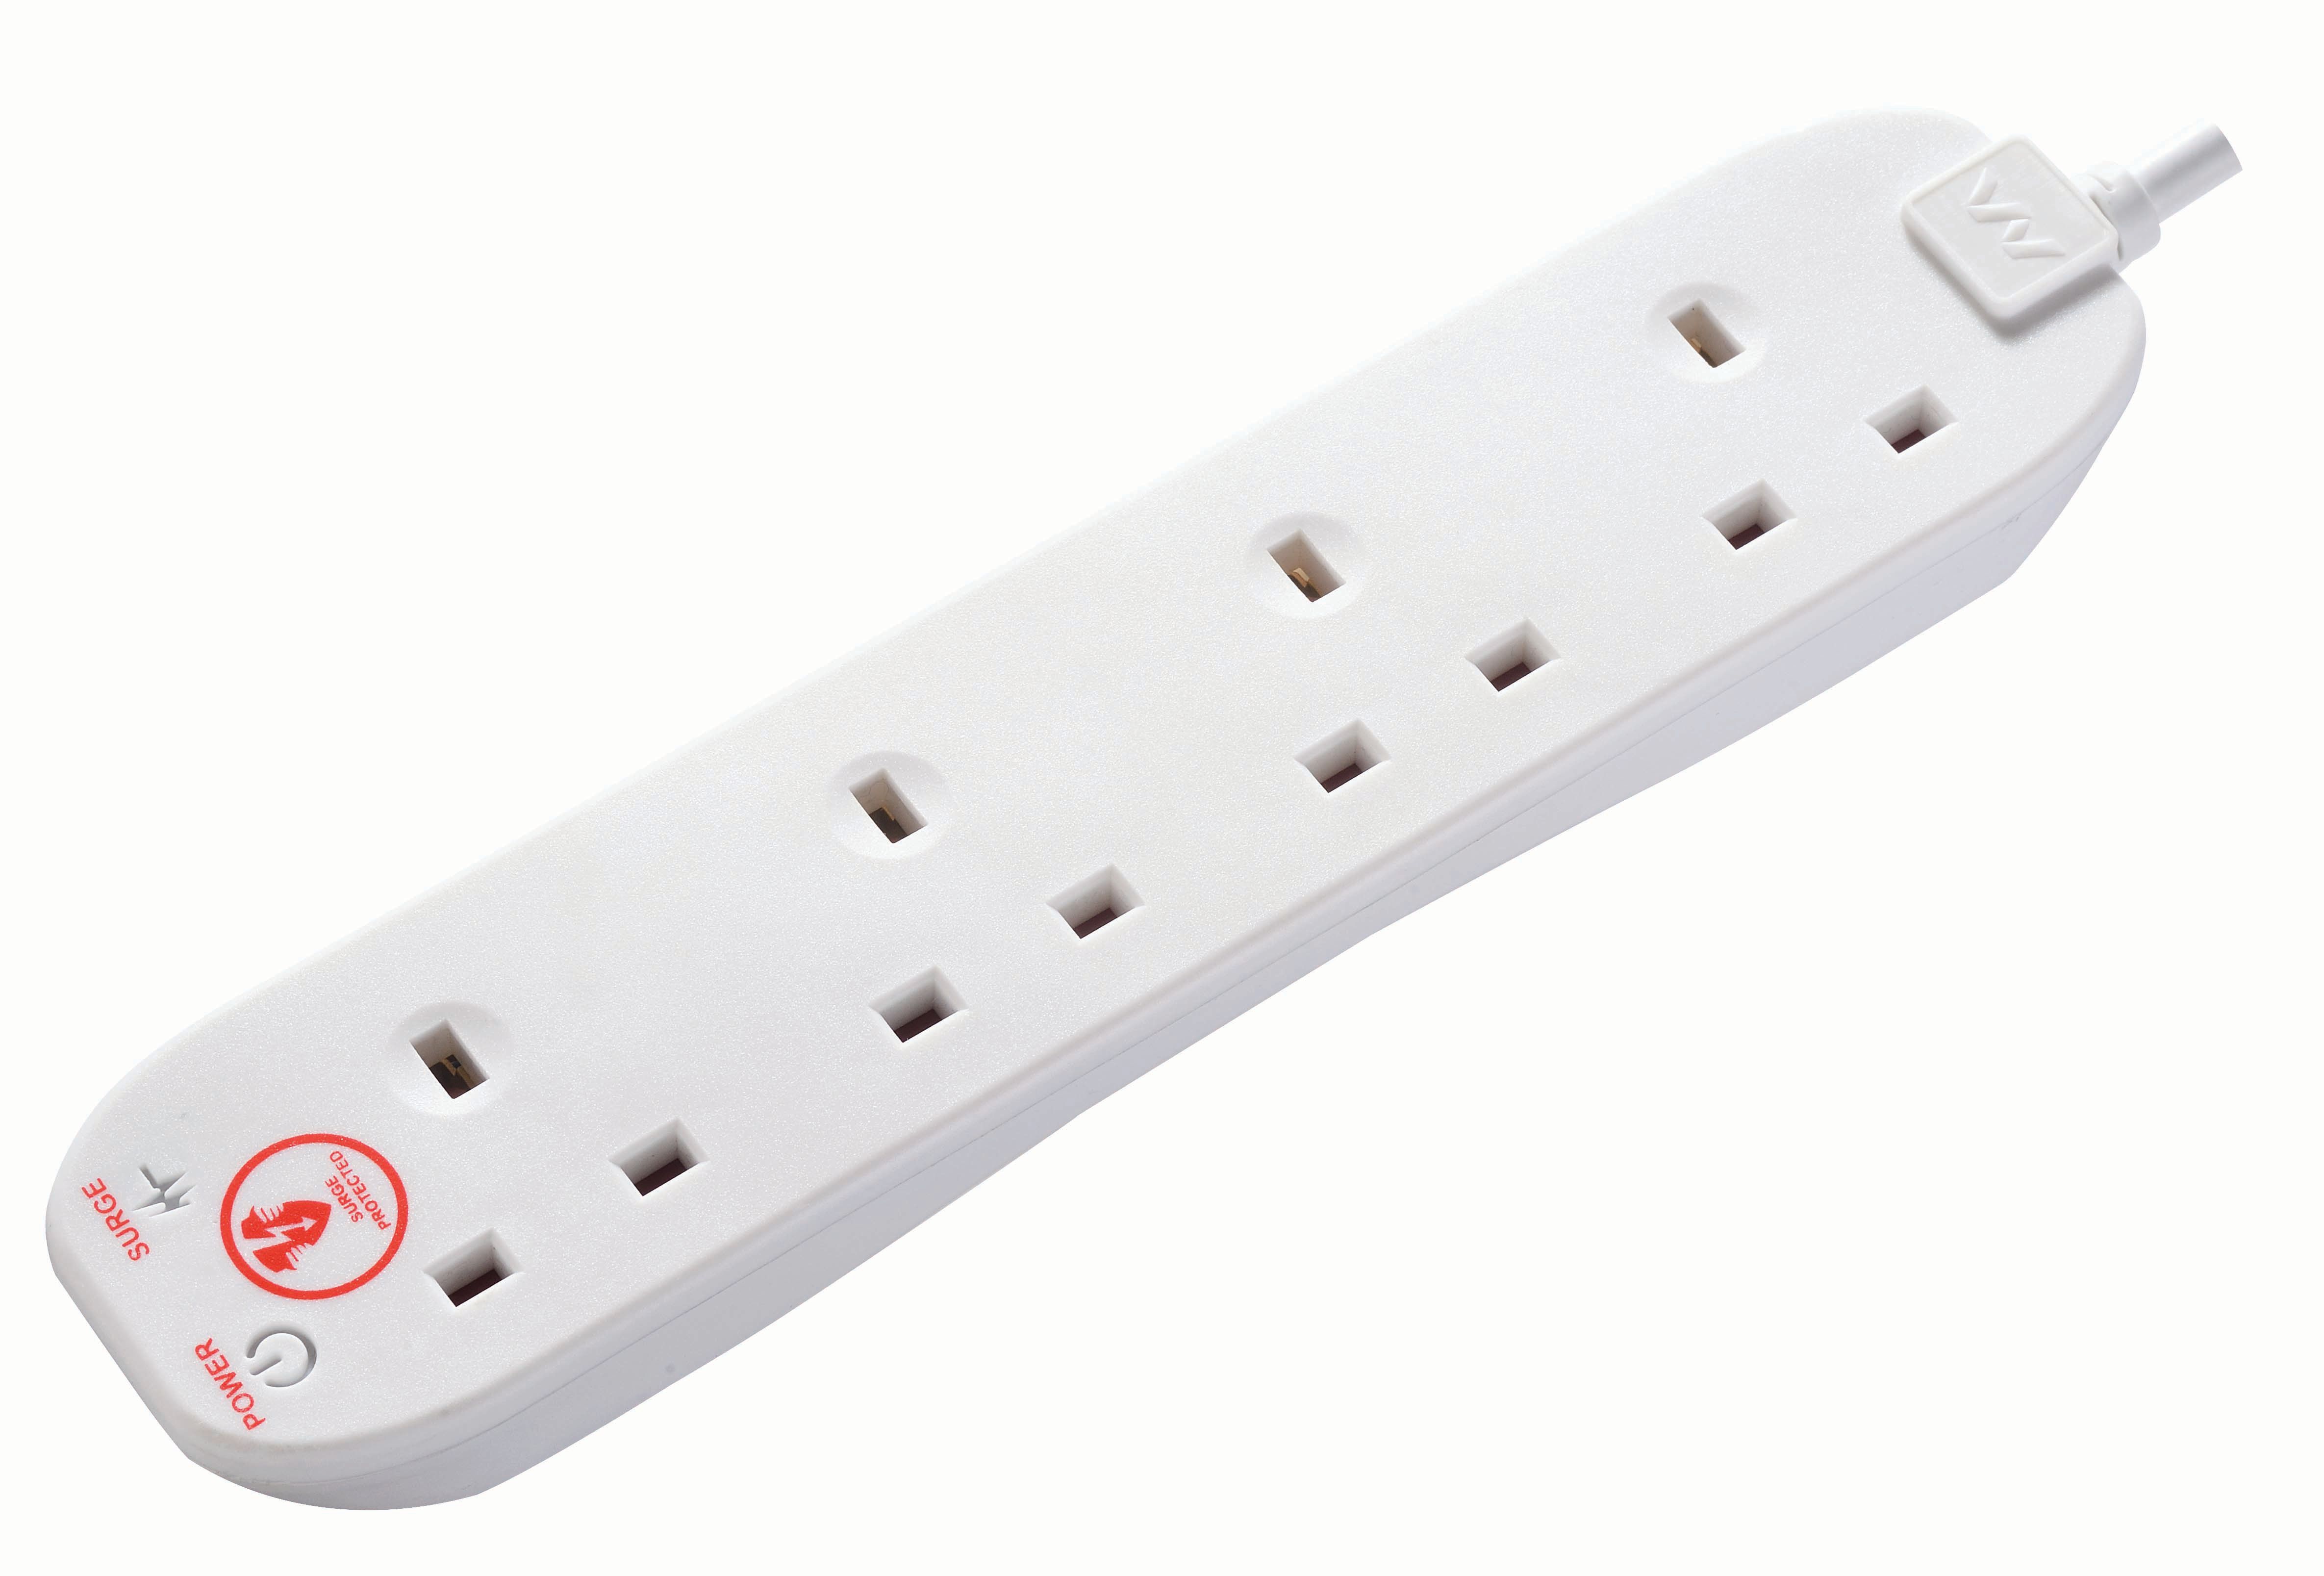 Masterplug 13A 4 Socket White Extension Lead with Surge Protection - 2m